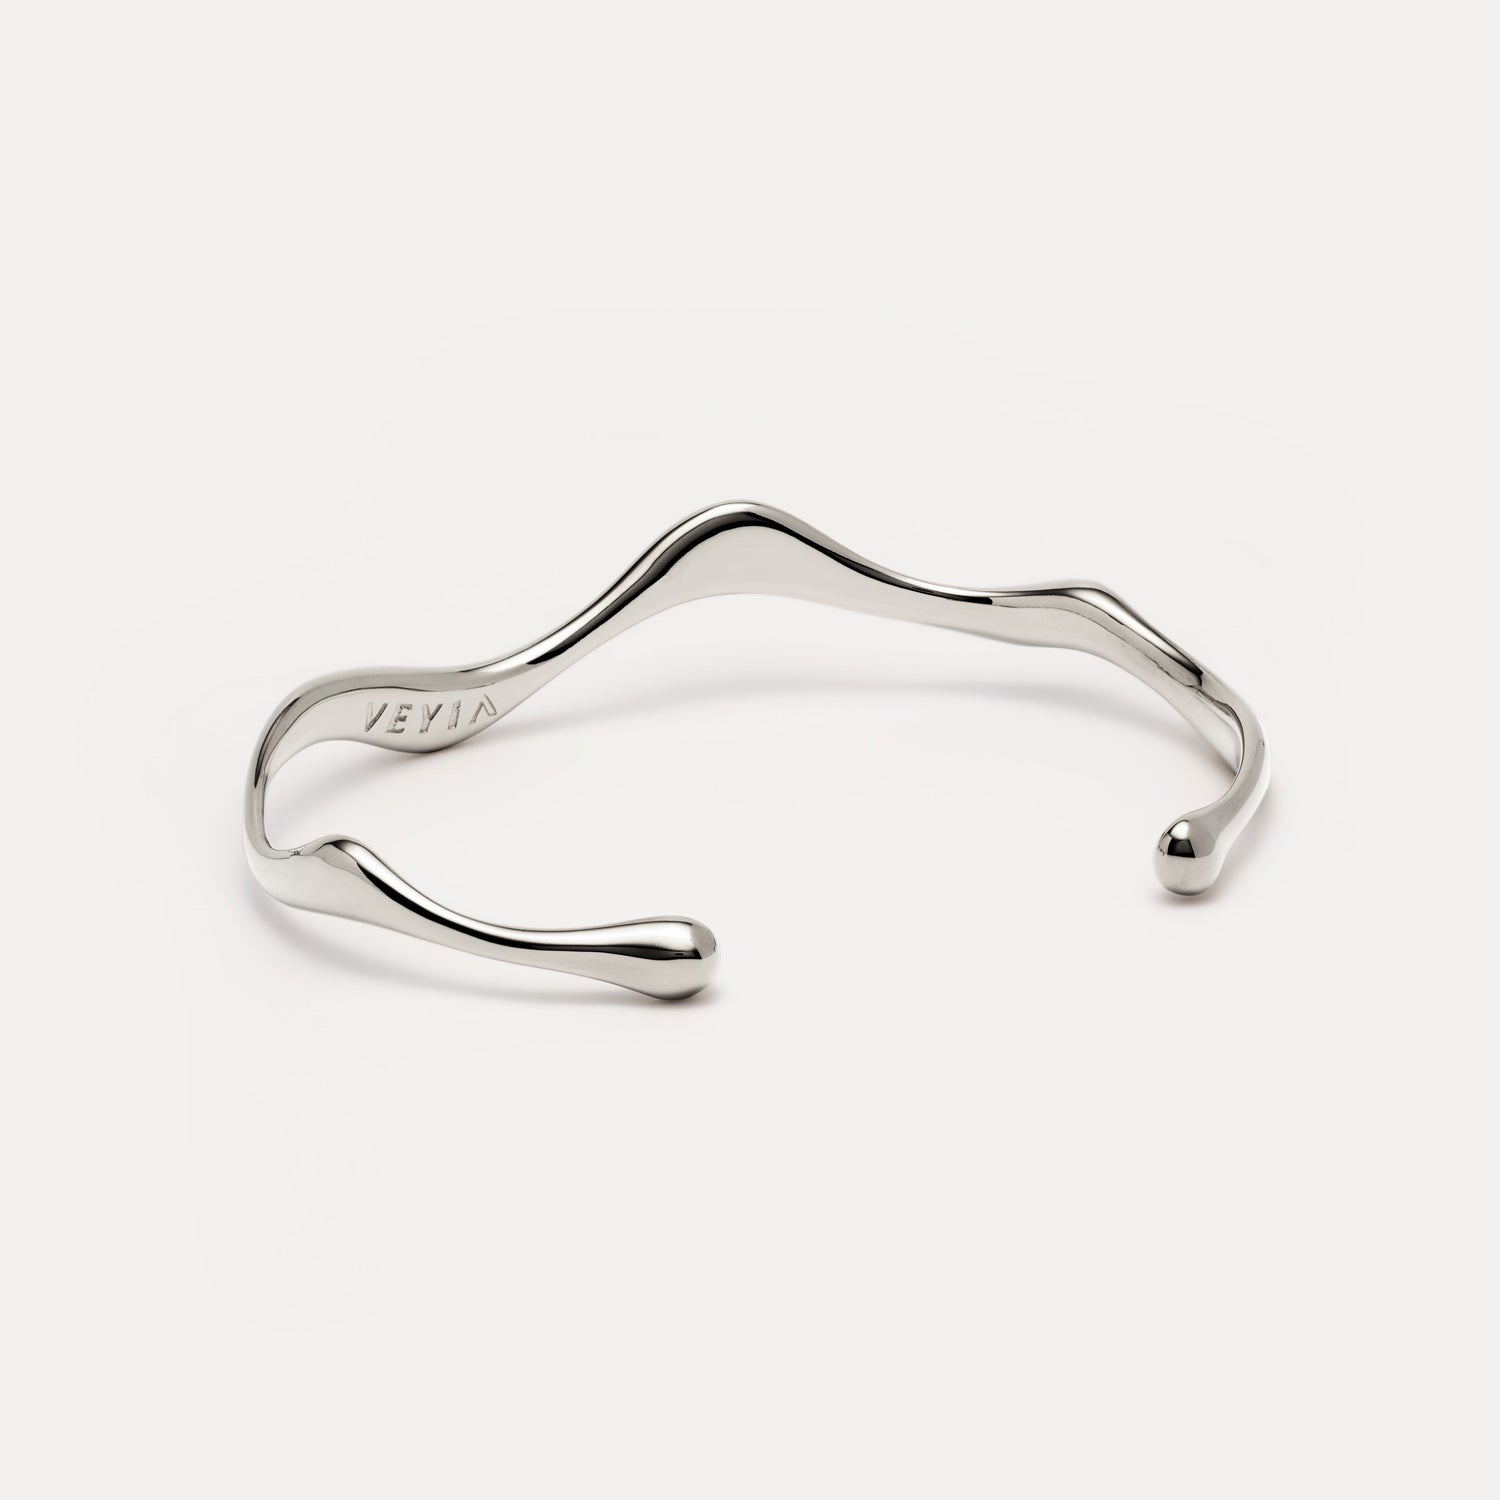 Poise Wave Cuff Bangle, recycled Sterling Silver - VEYIA Berlin